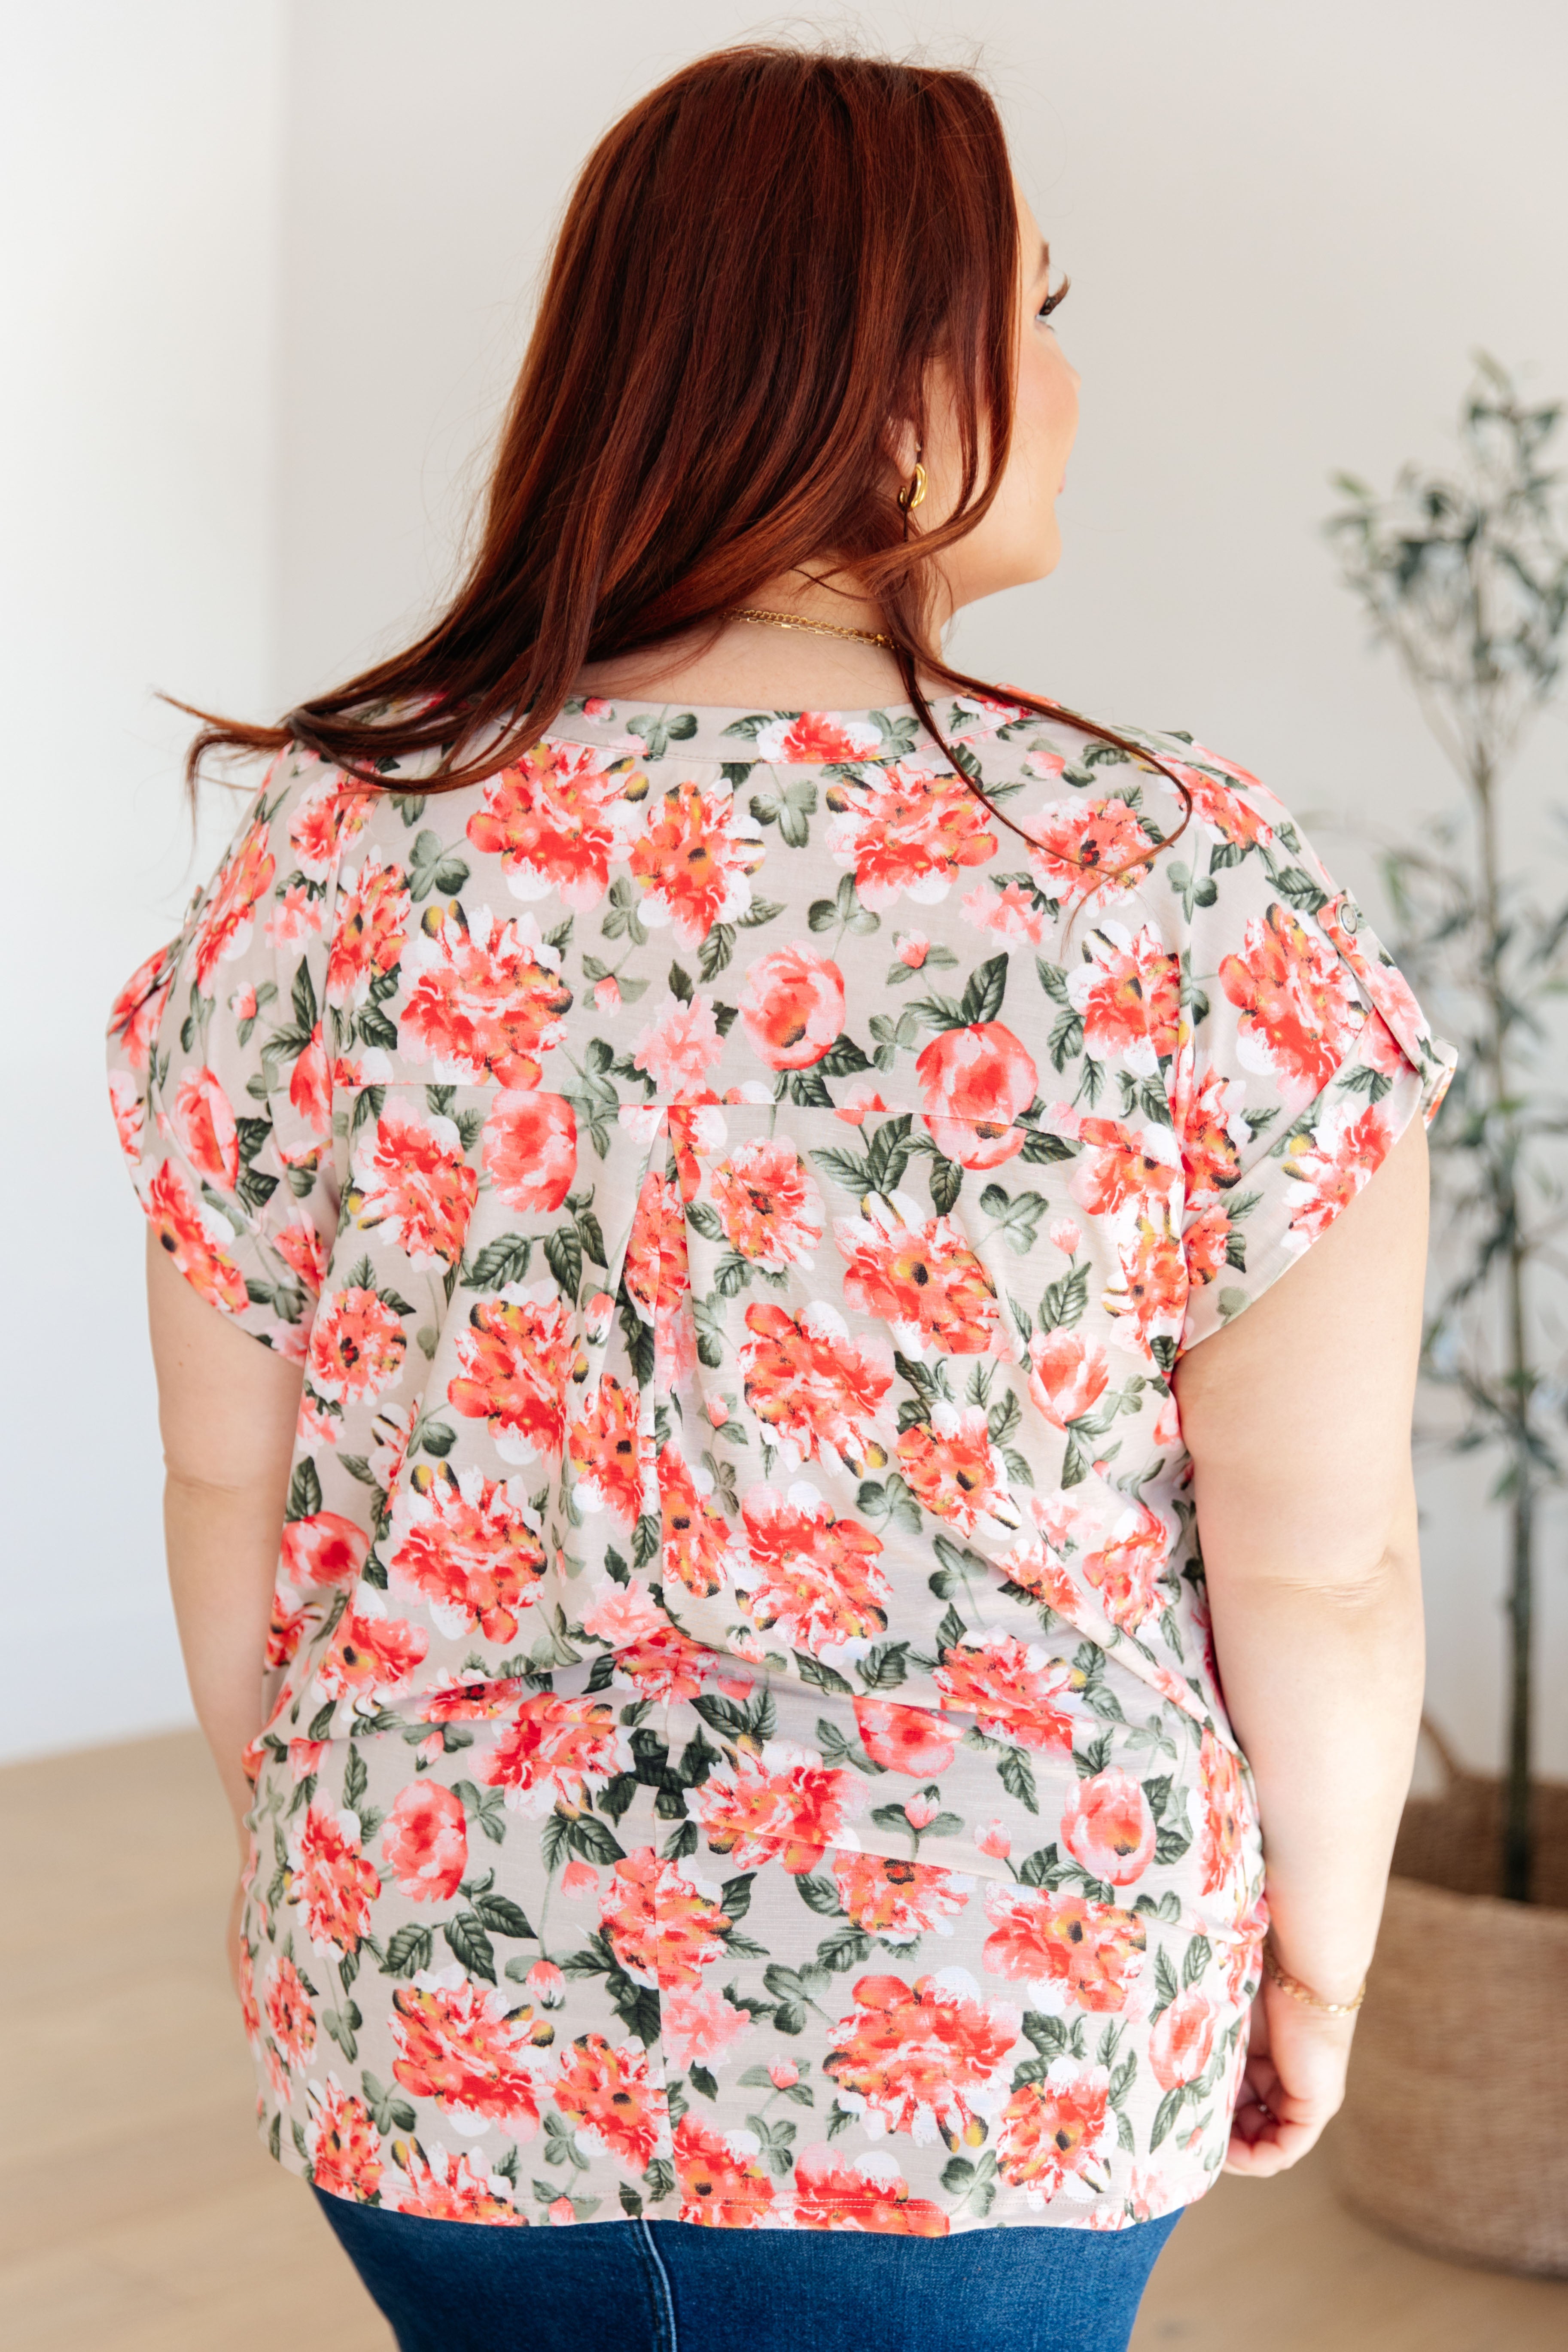 Dear Scarlett Lizzy Cap Sleeve Top in Coral and Beige Floral Final Sale Monday Markdown 06-04